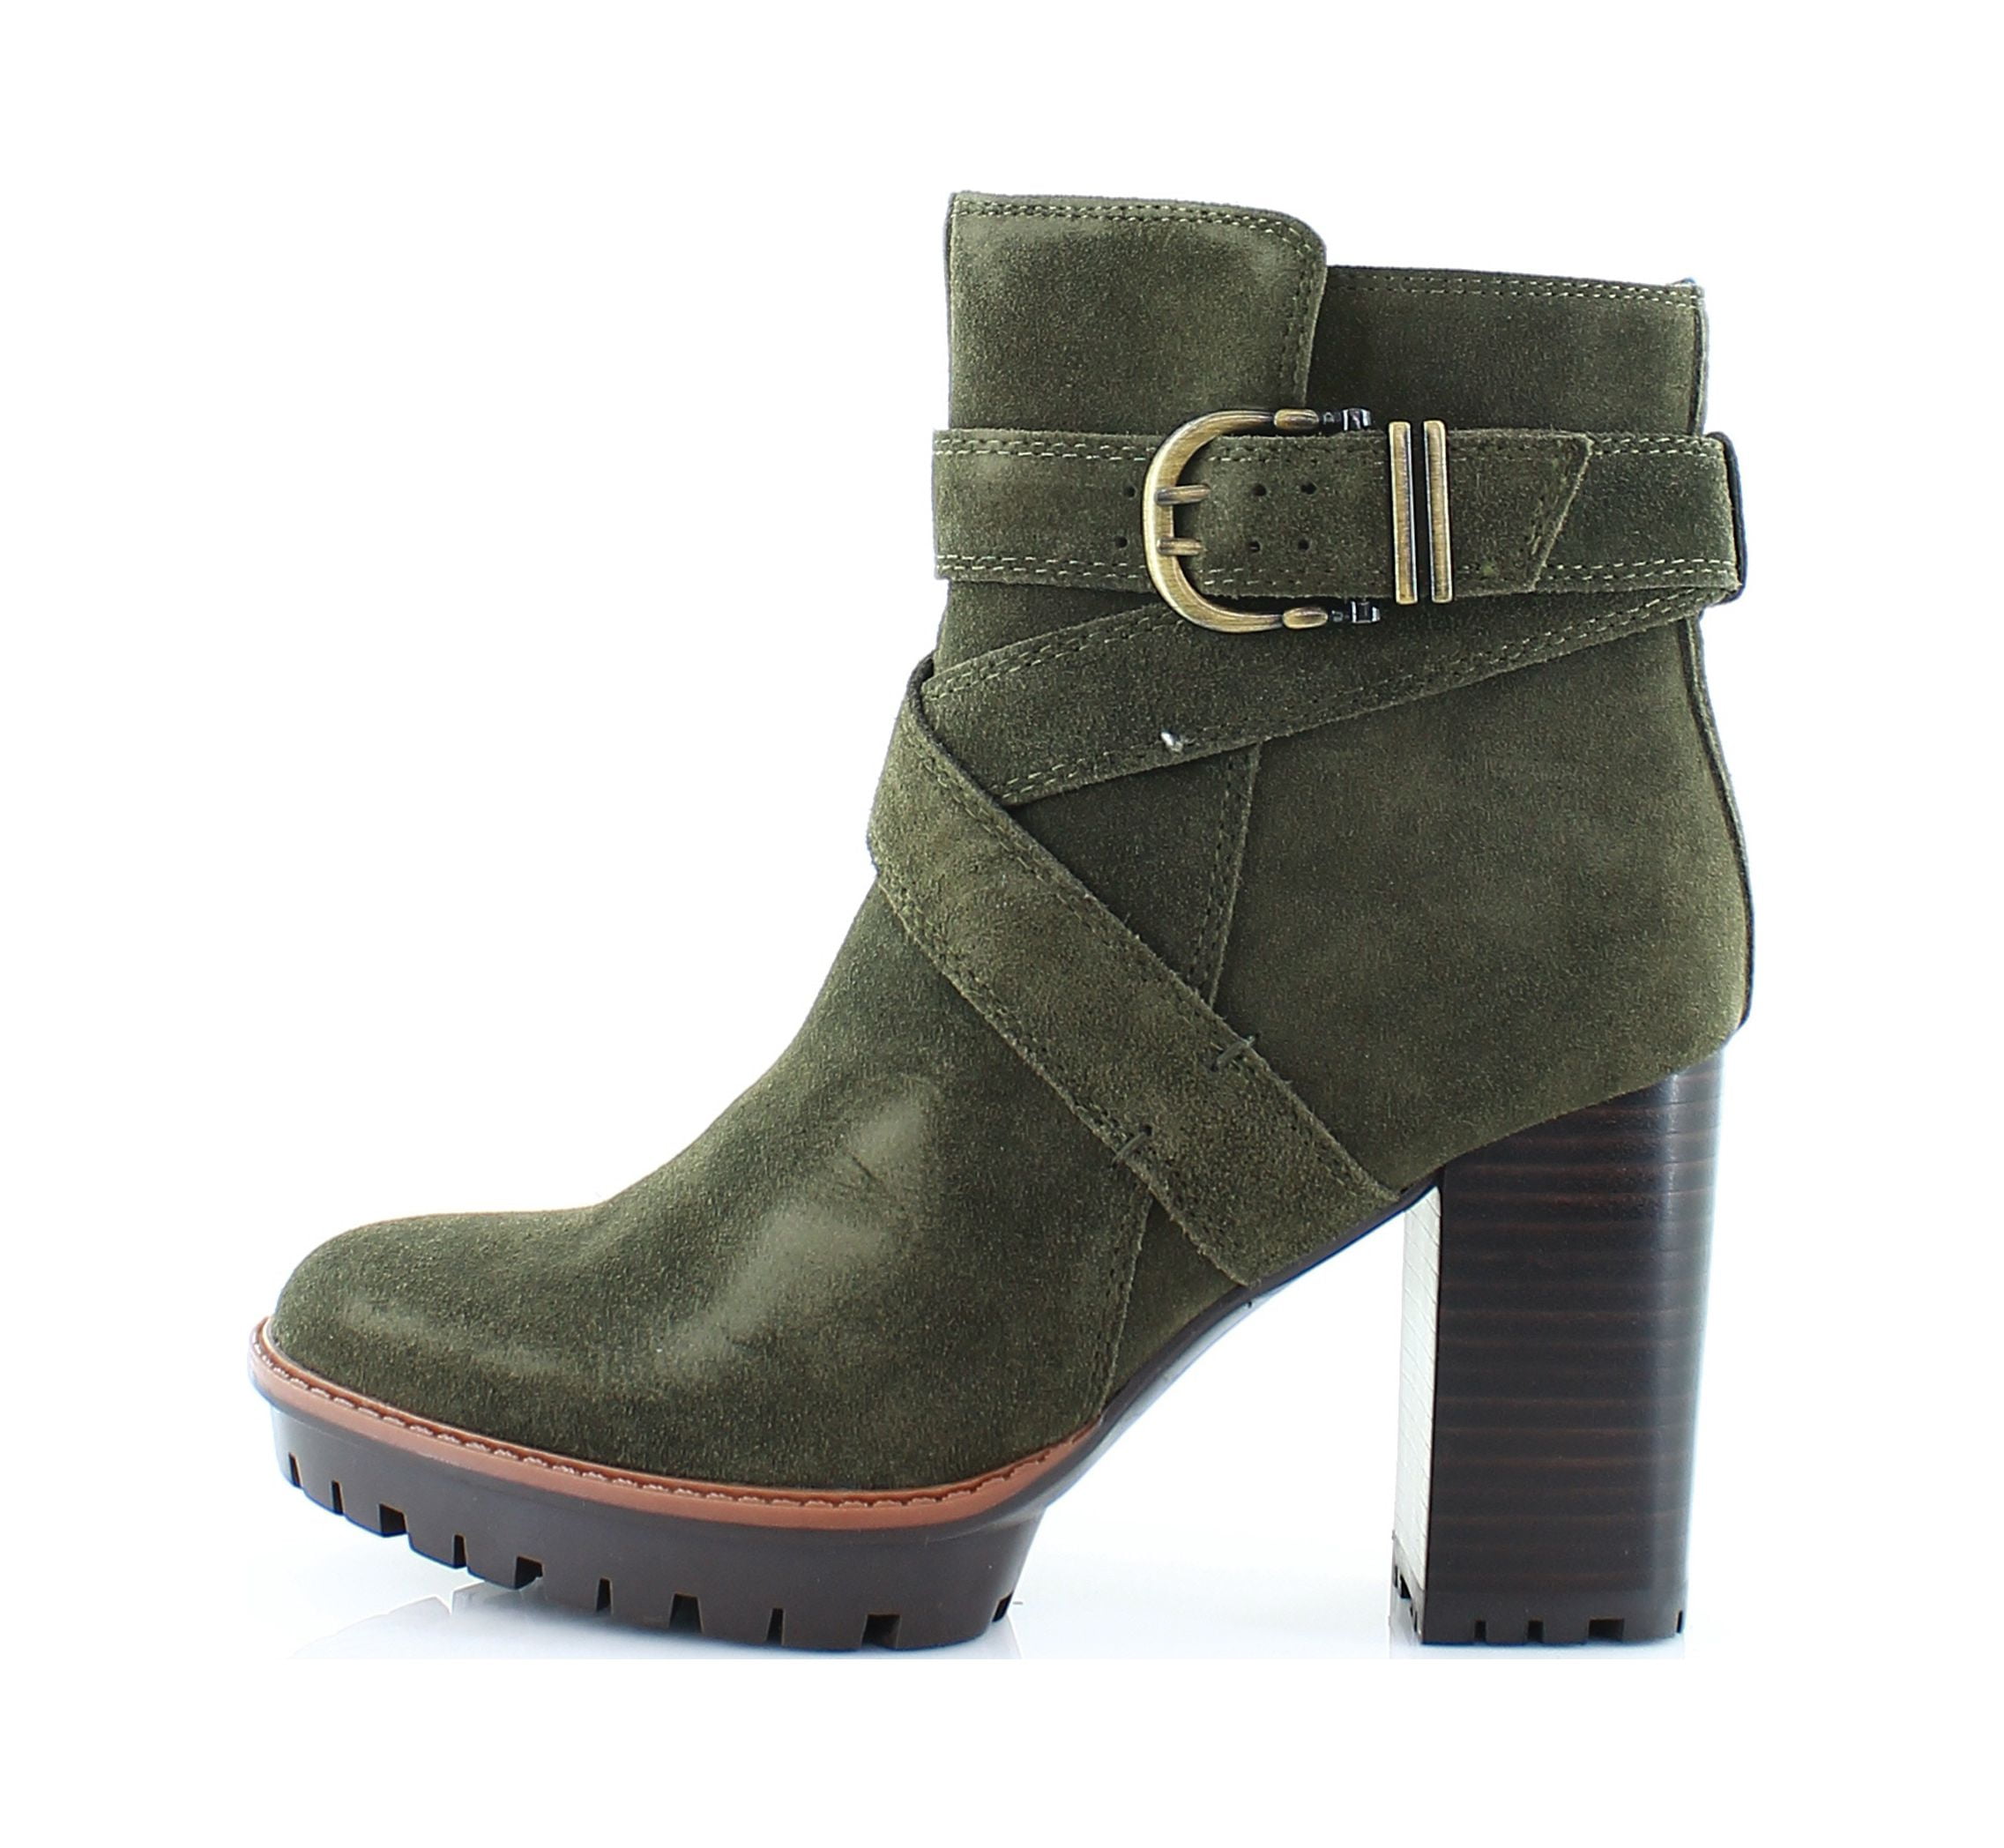 Naturalizer Women's Lyra Ankle Boots Green Suede 9W 